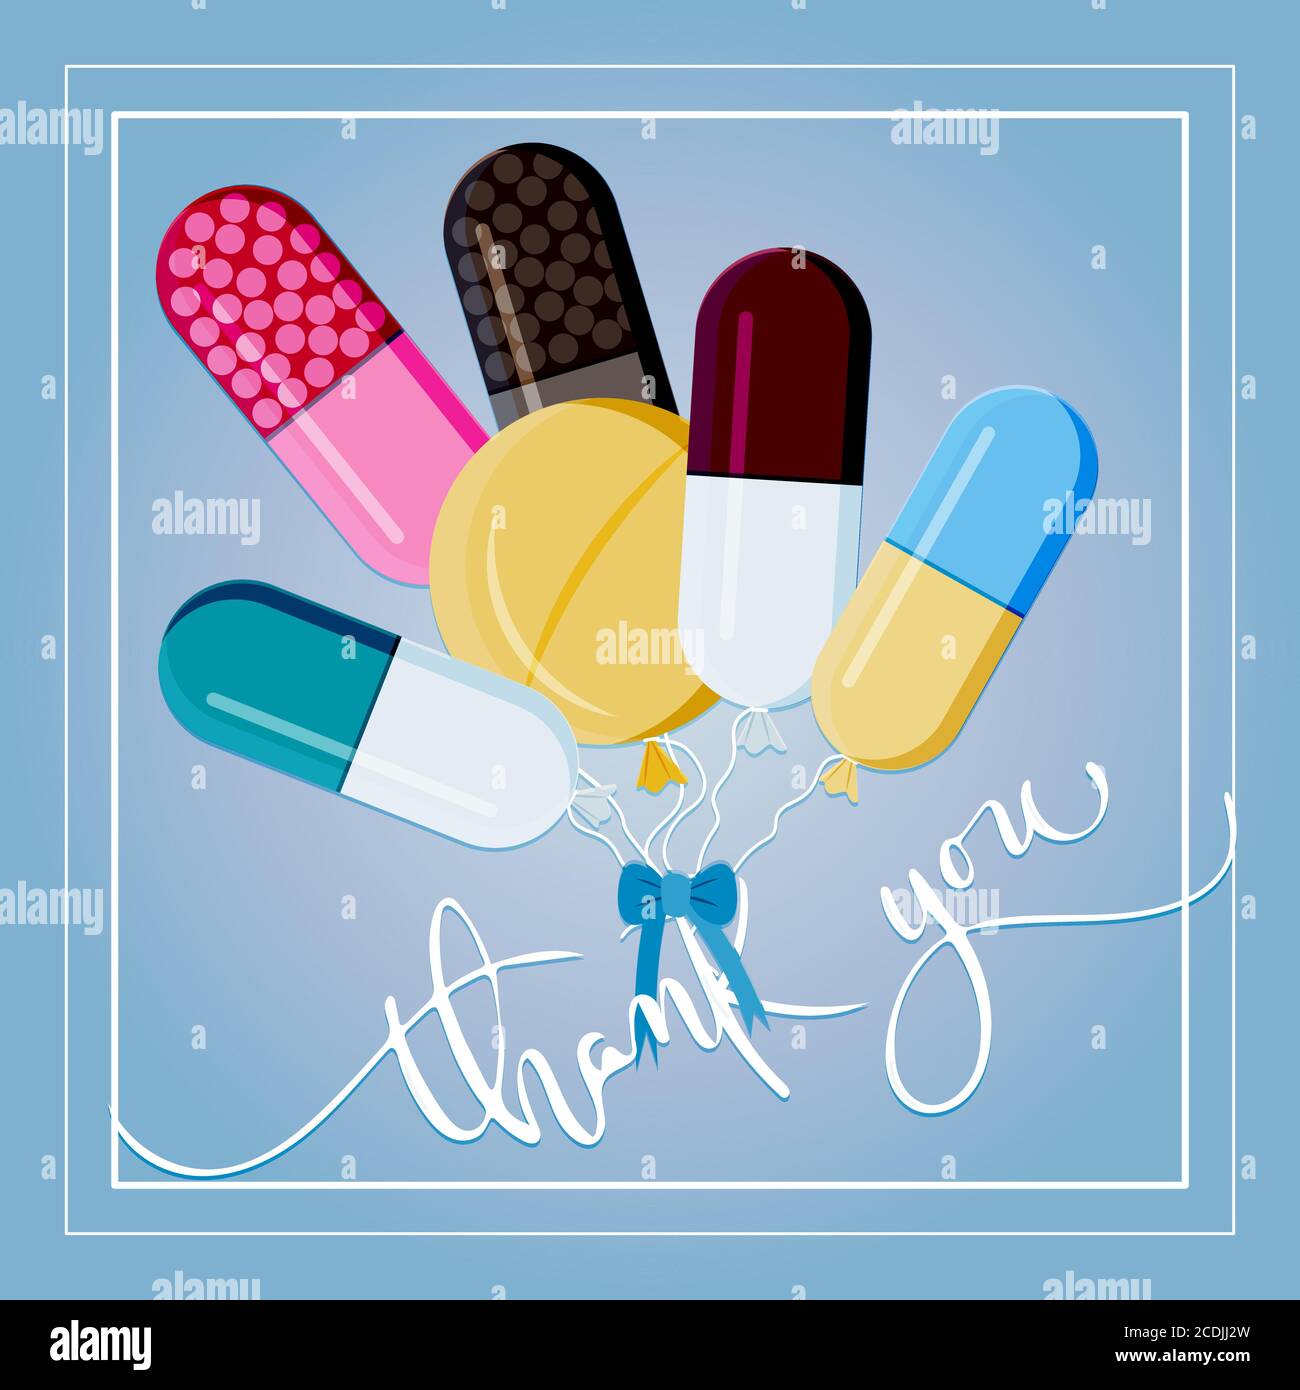 Vector illustration of balloons in the form of tablets and pills. A thank you greeting card for a nurse, doctor, pharmacist, or healthcare professional. Congratulations on nurse s day on may 12 or doctor s day. Medical concept. Funny design. Stock Vector